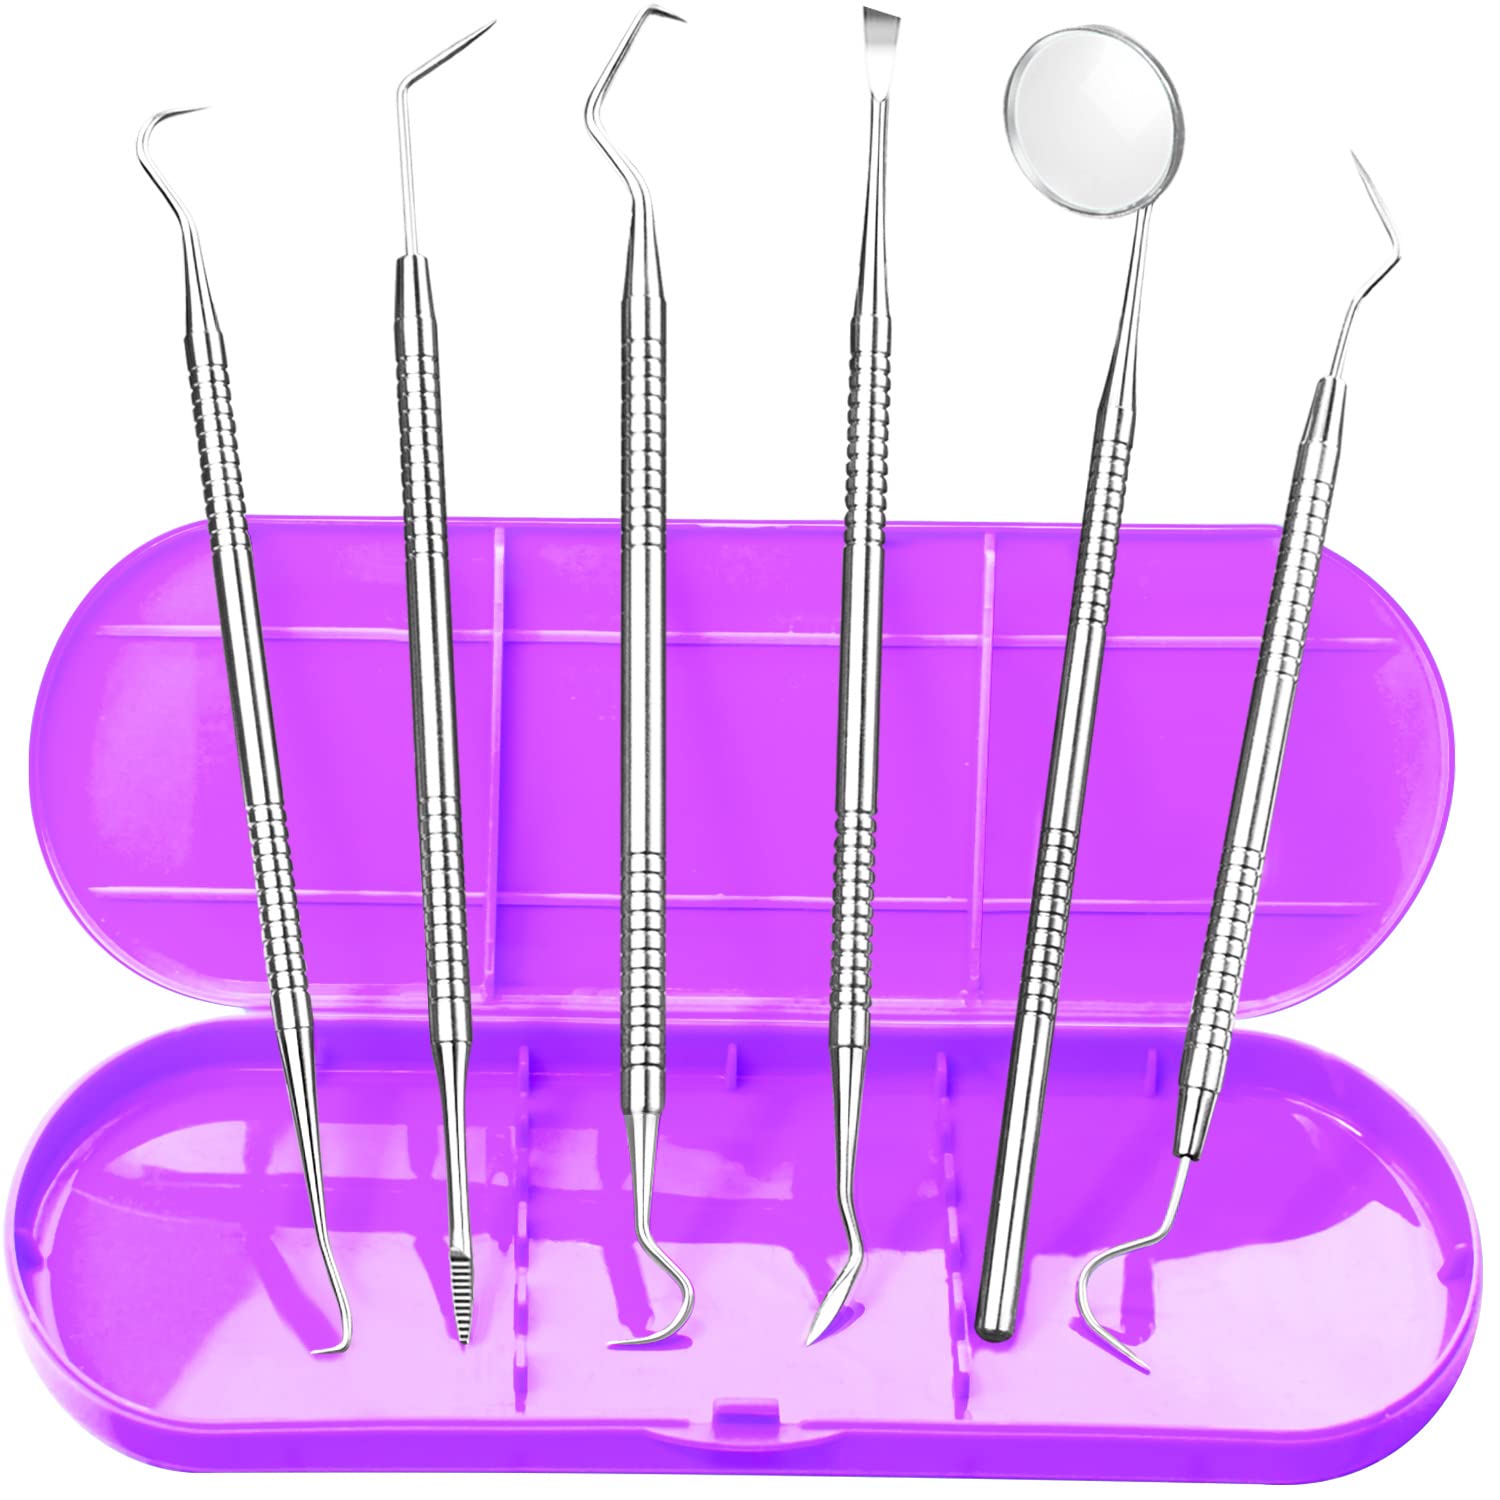 G.CATACC dental tools, 10 pack professional plaque remover teeth cleaning  tools set, stainless steel oral